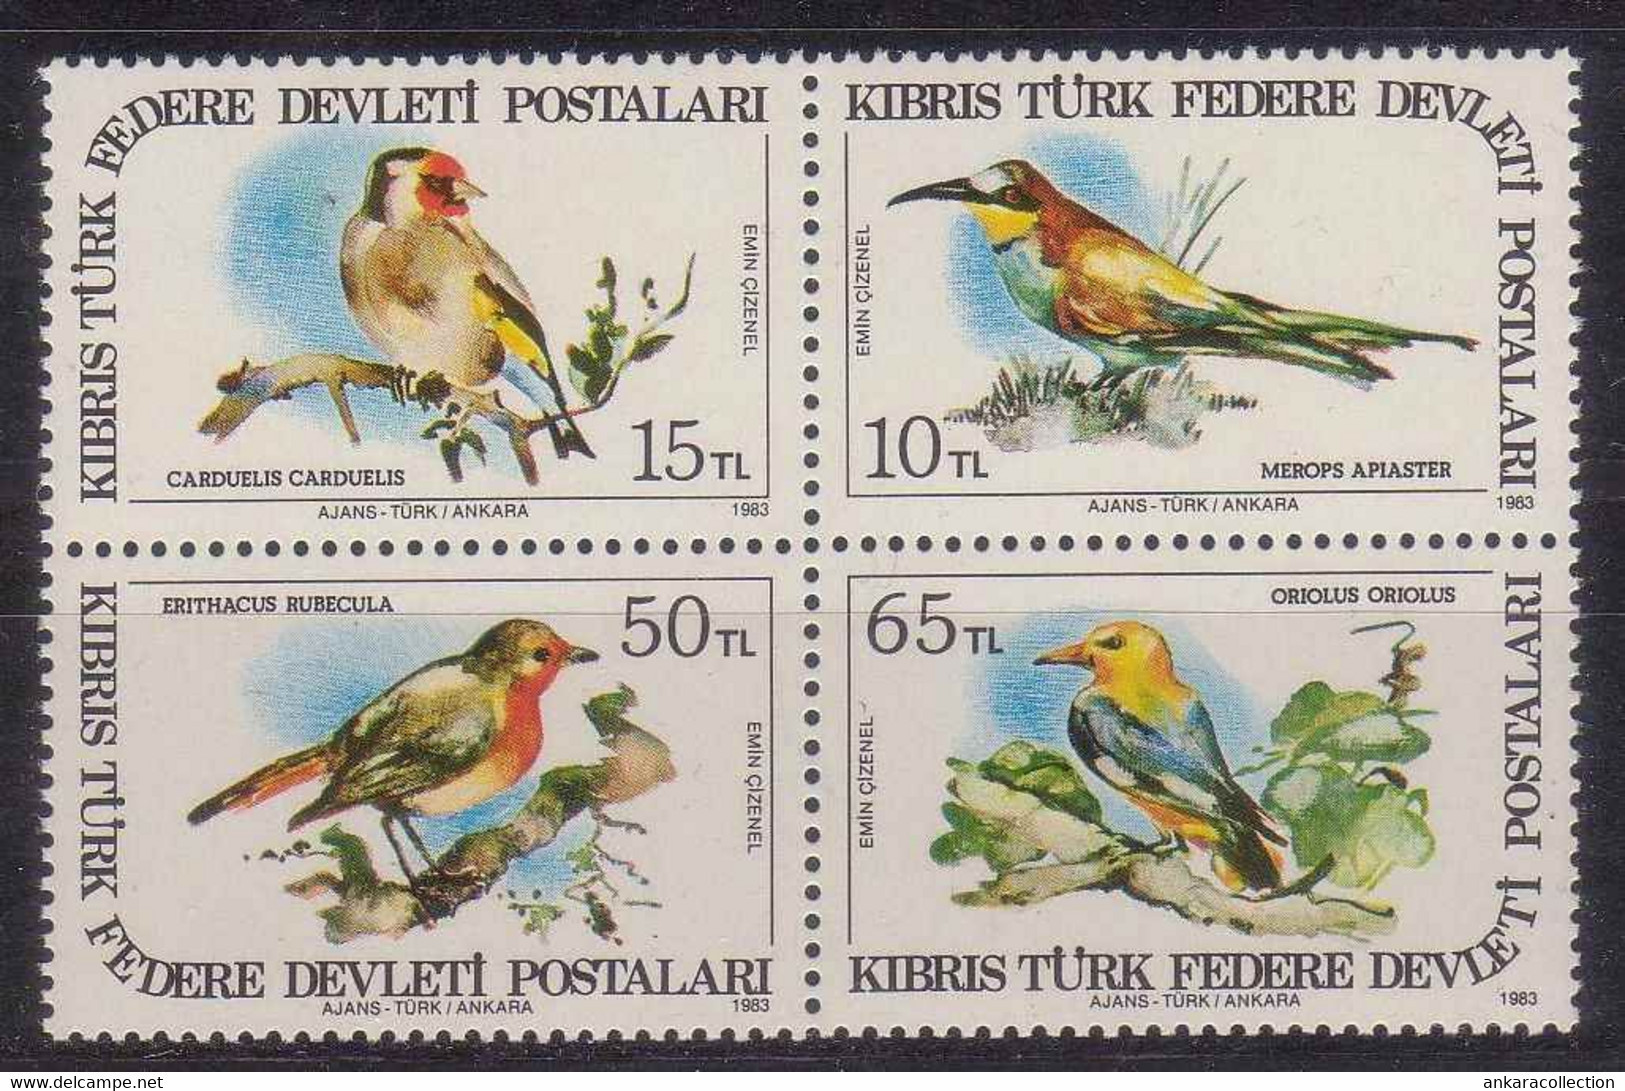 AC - NORTHERN CYPRUS STAMP - BIRDS MNH 10 OCTOBER 1983 - Unused Stamps